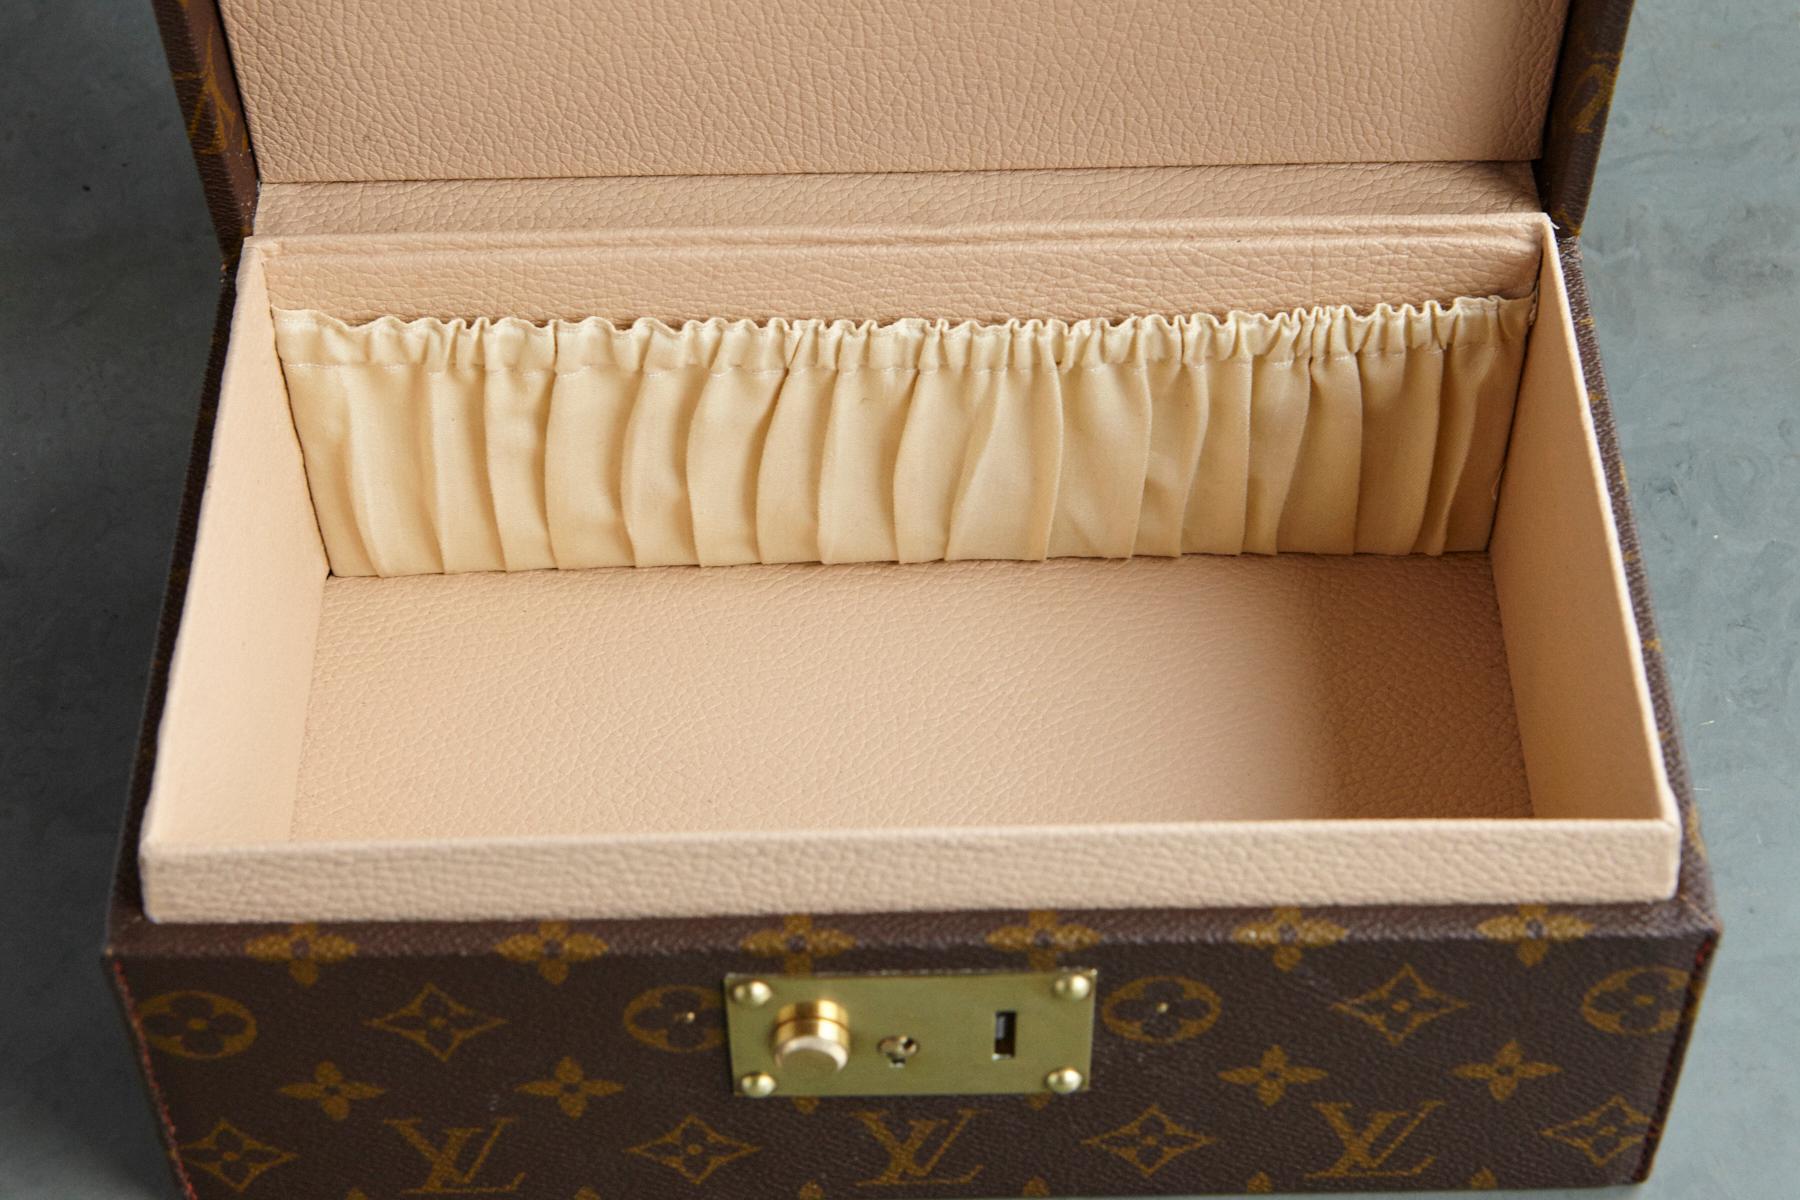 Louis Vuitton Monogram Vanity or Cosmetic Case from the Collection of Ann Turkel 1